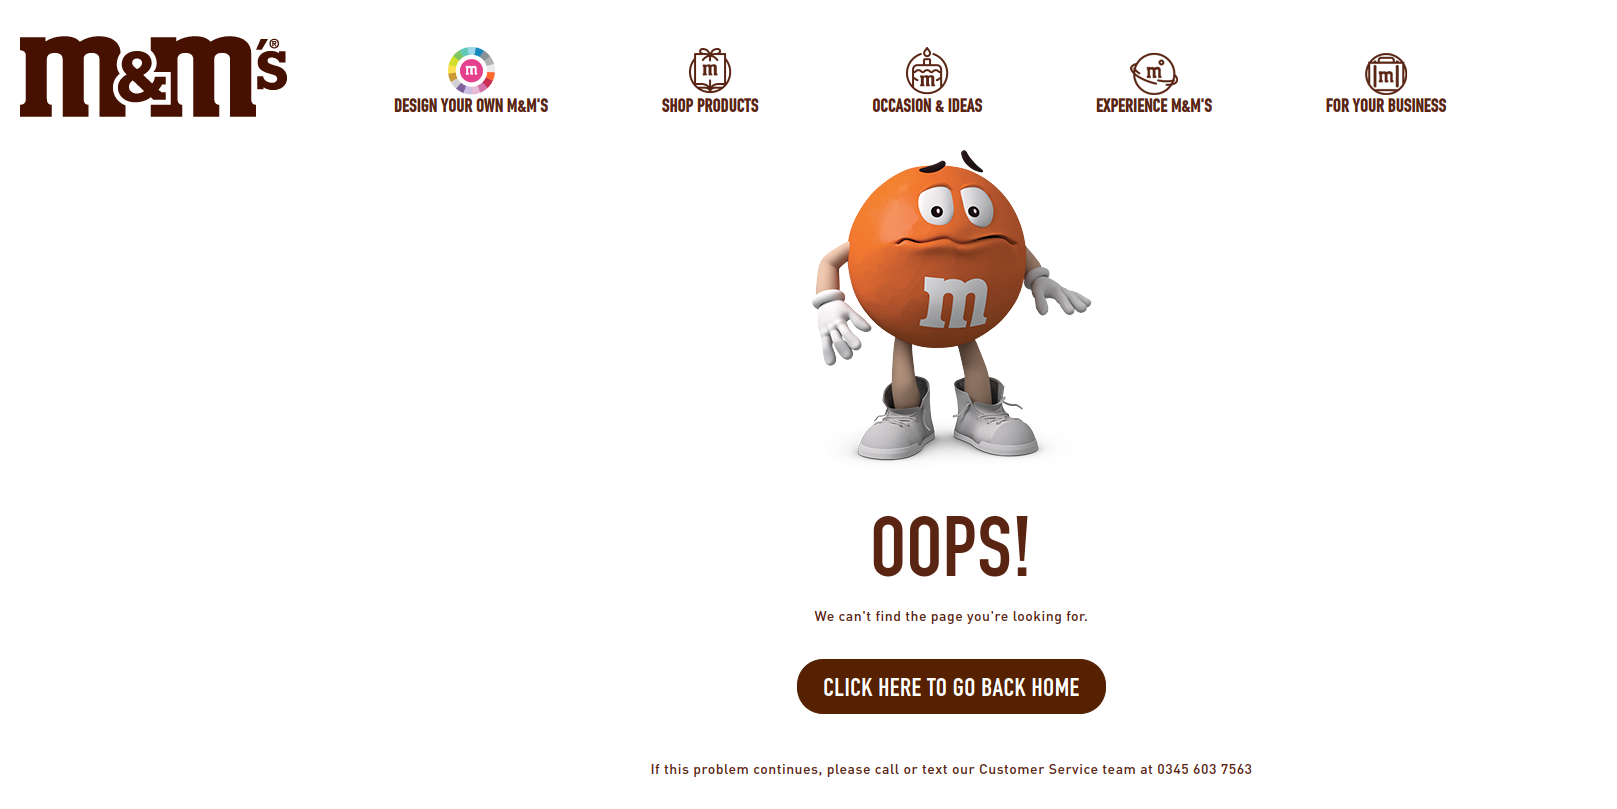 The M&M's 404 error page is an example of an informational landing page